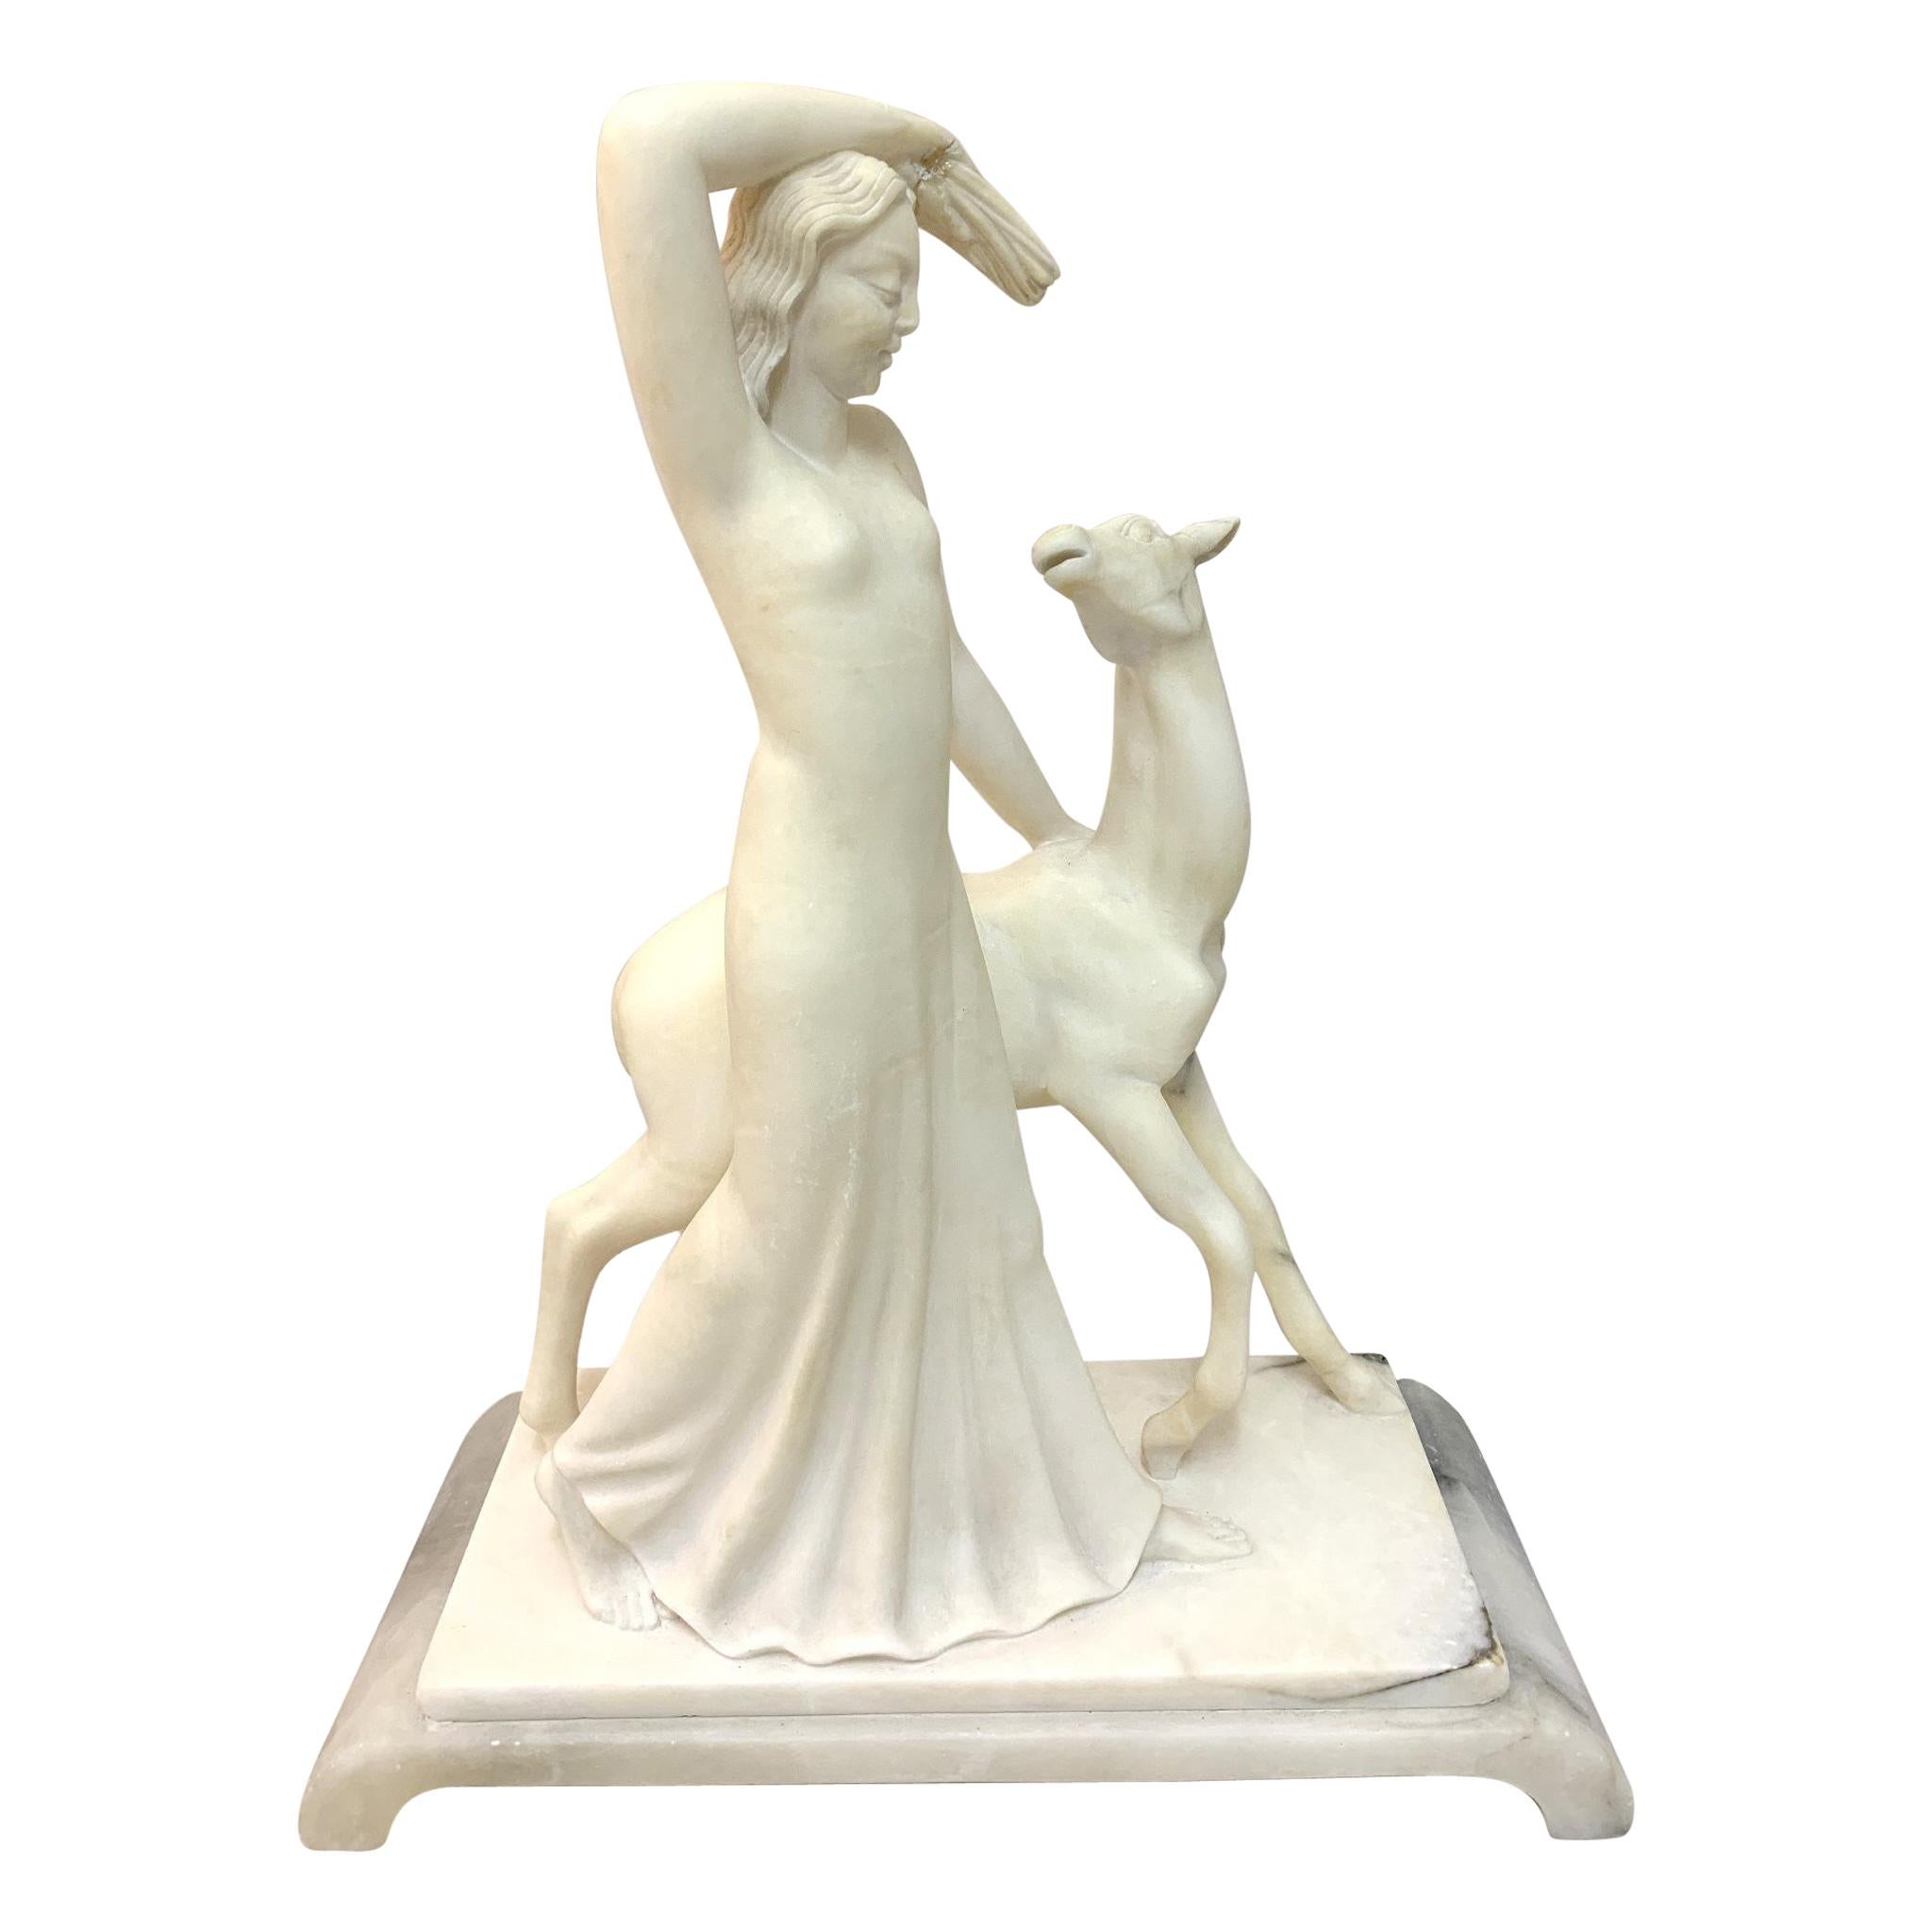 Marvelous Art Deco Lady with Fawn Sculpture, Alabaster, 1930s